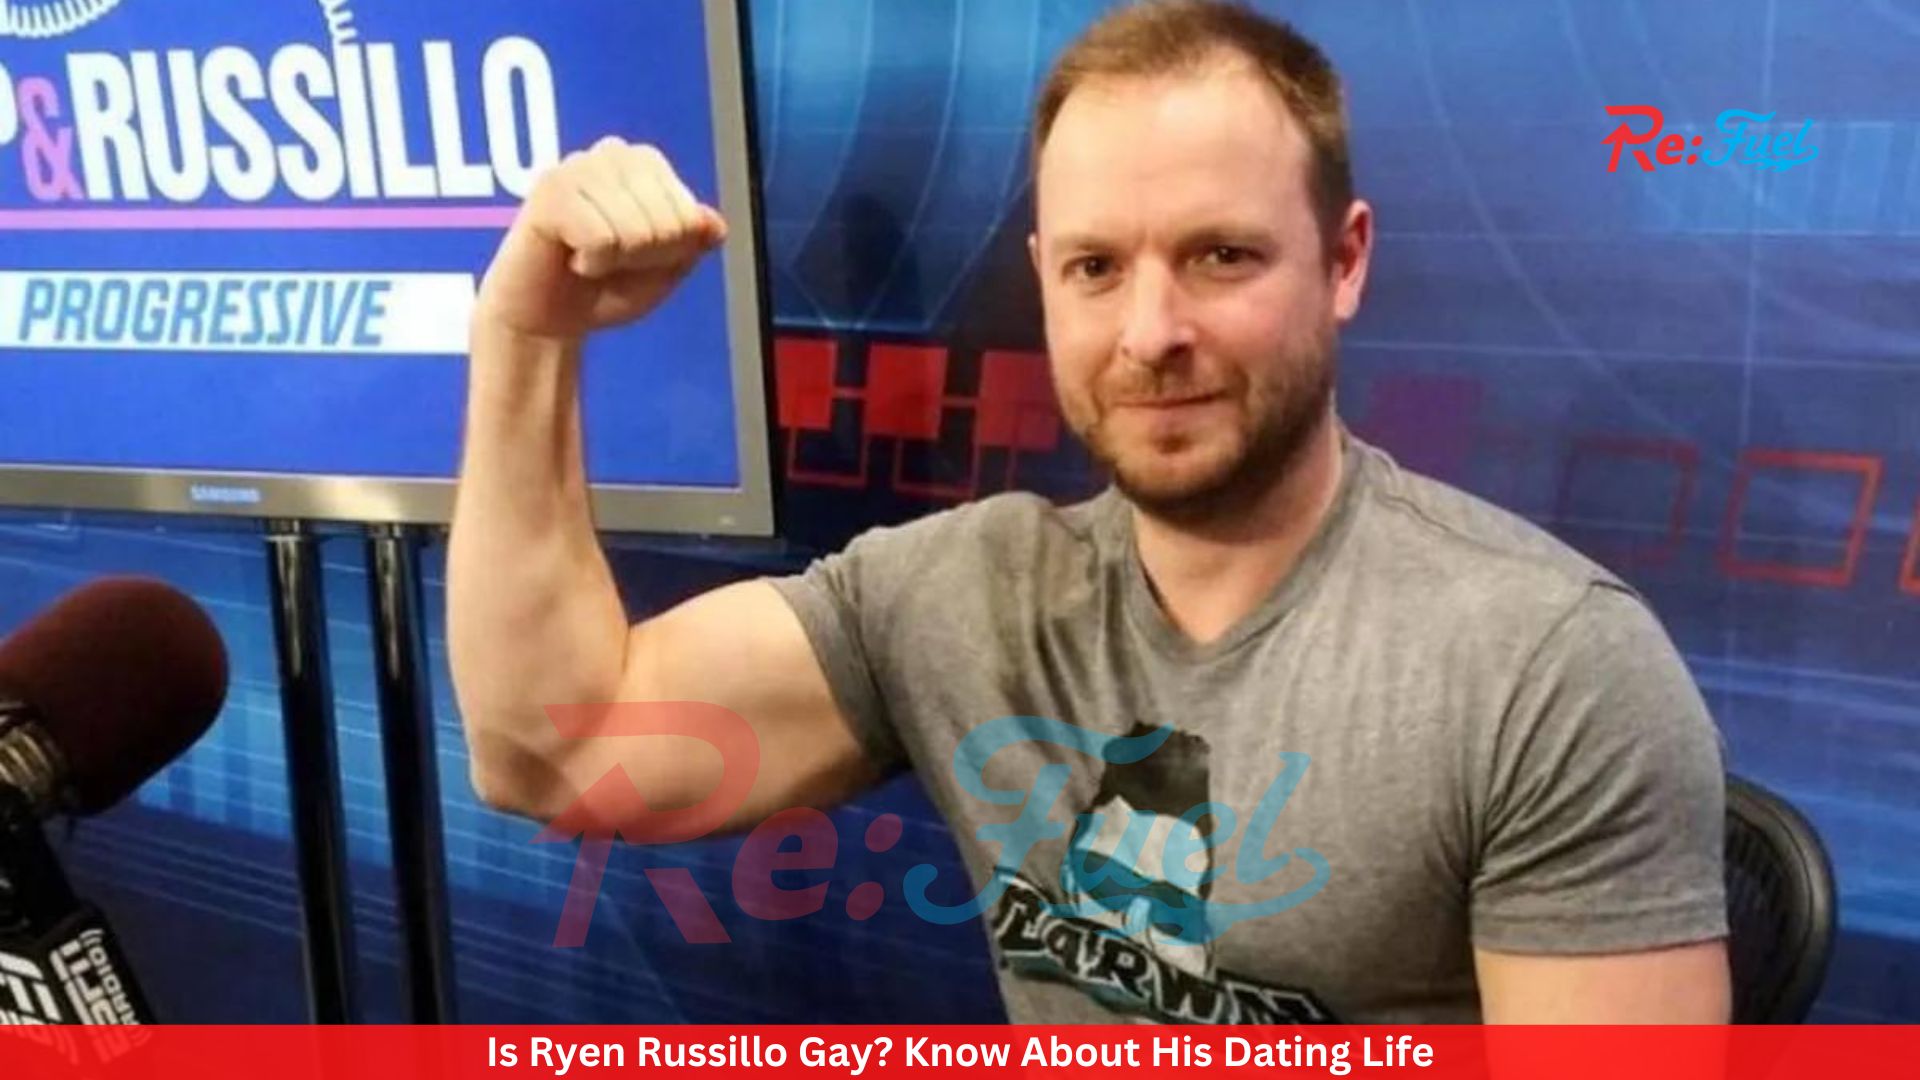 Is Ryen Russillo Gay? Know About His Dating Life